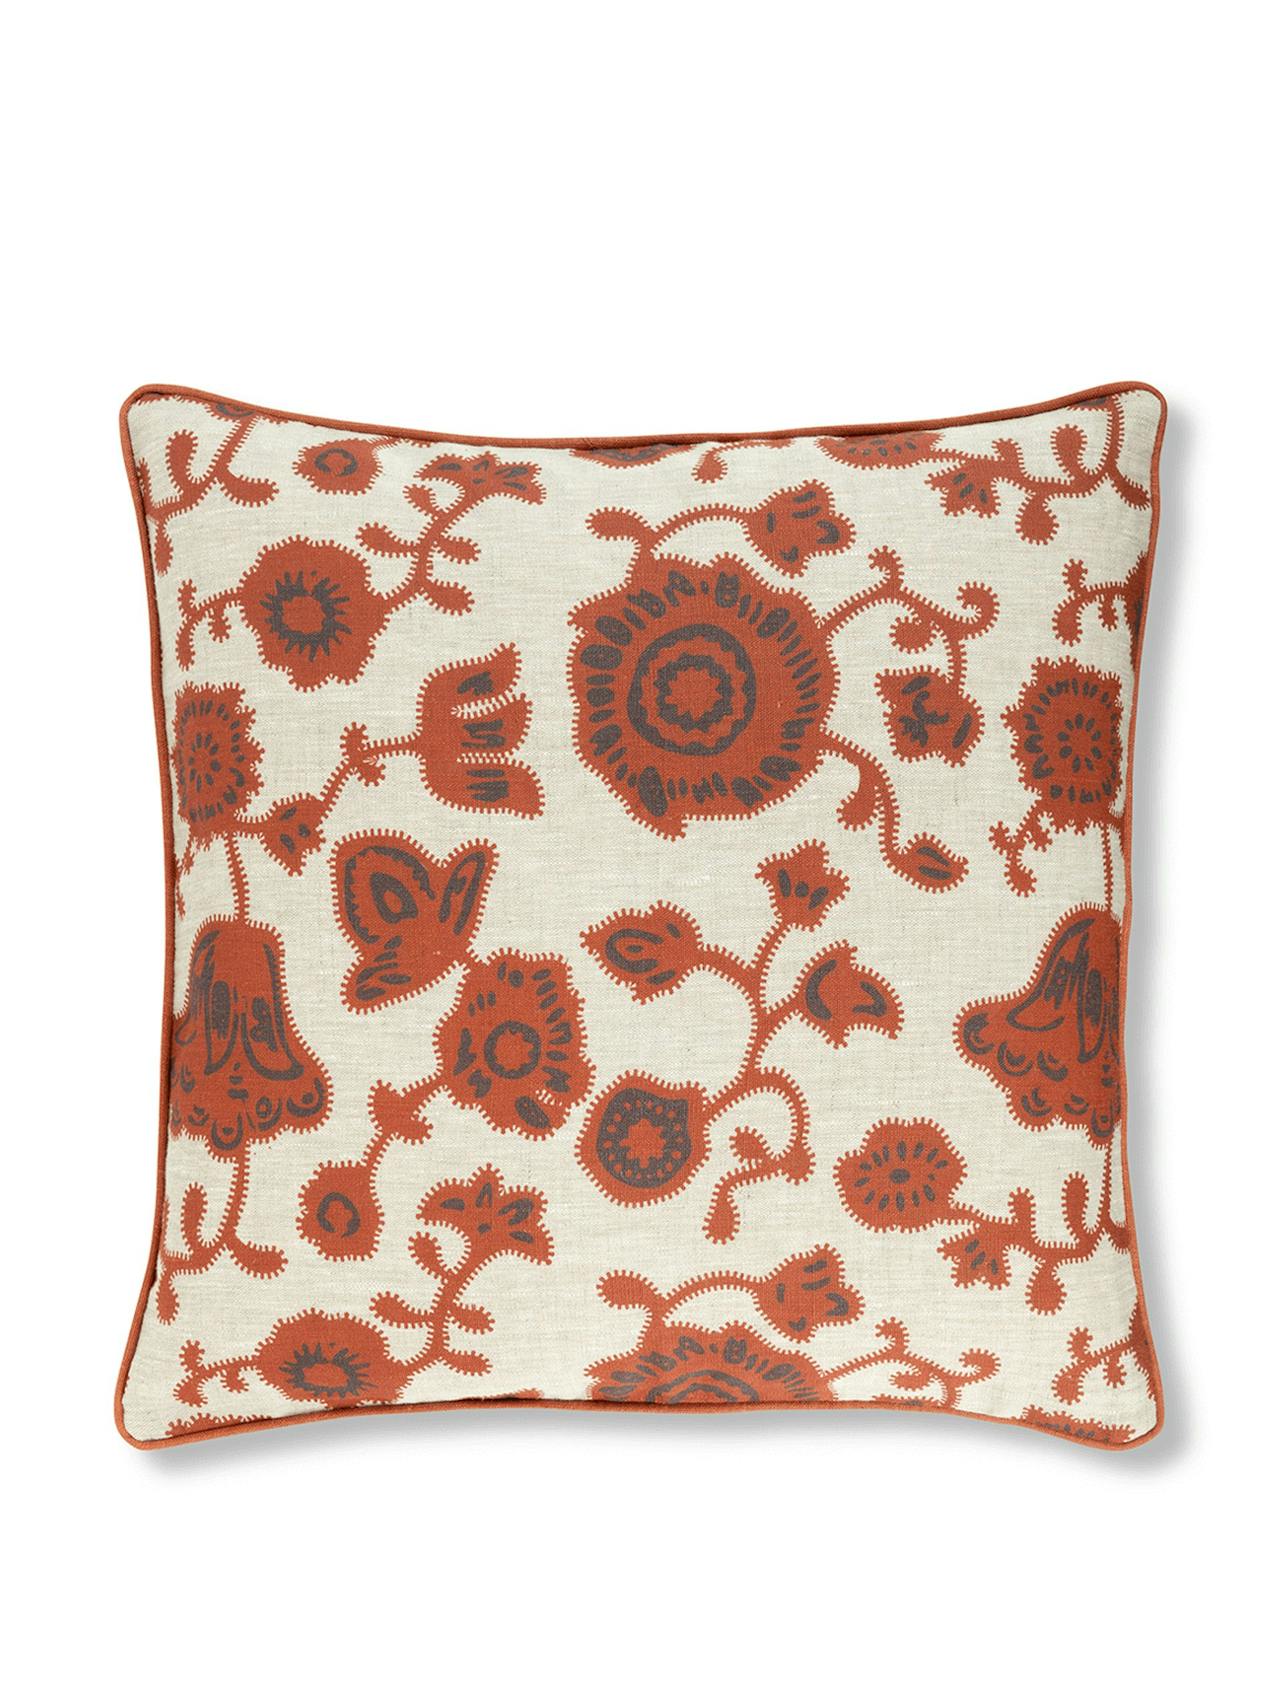 Persian Poppy print cushion in red with terracotta trim